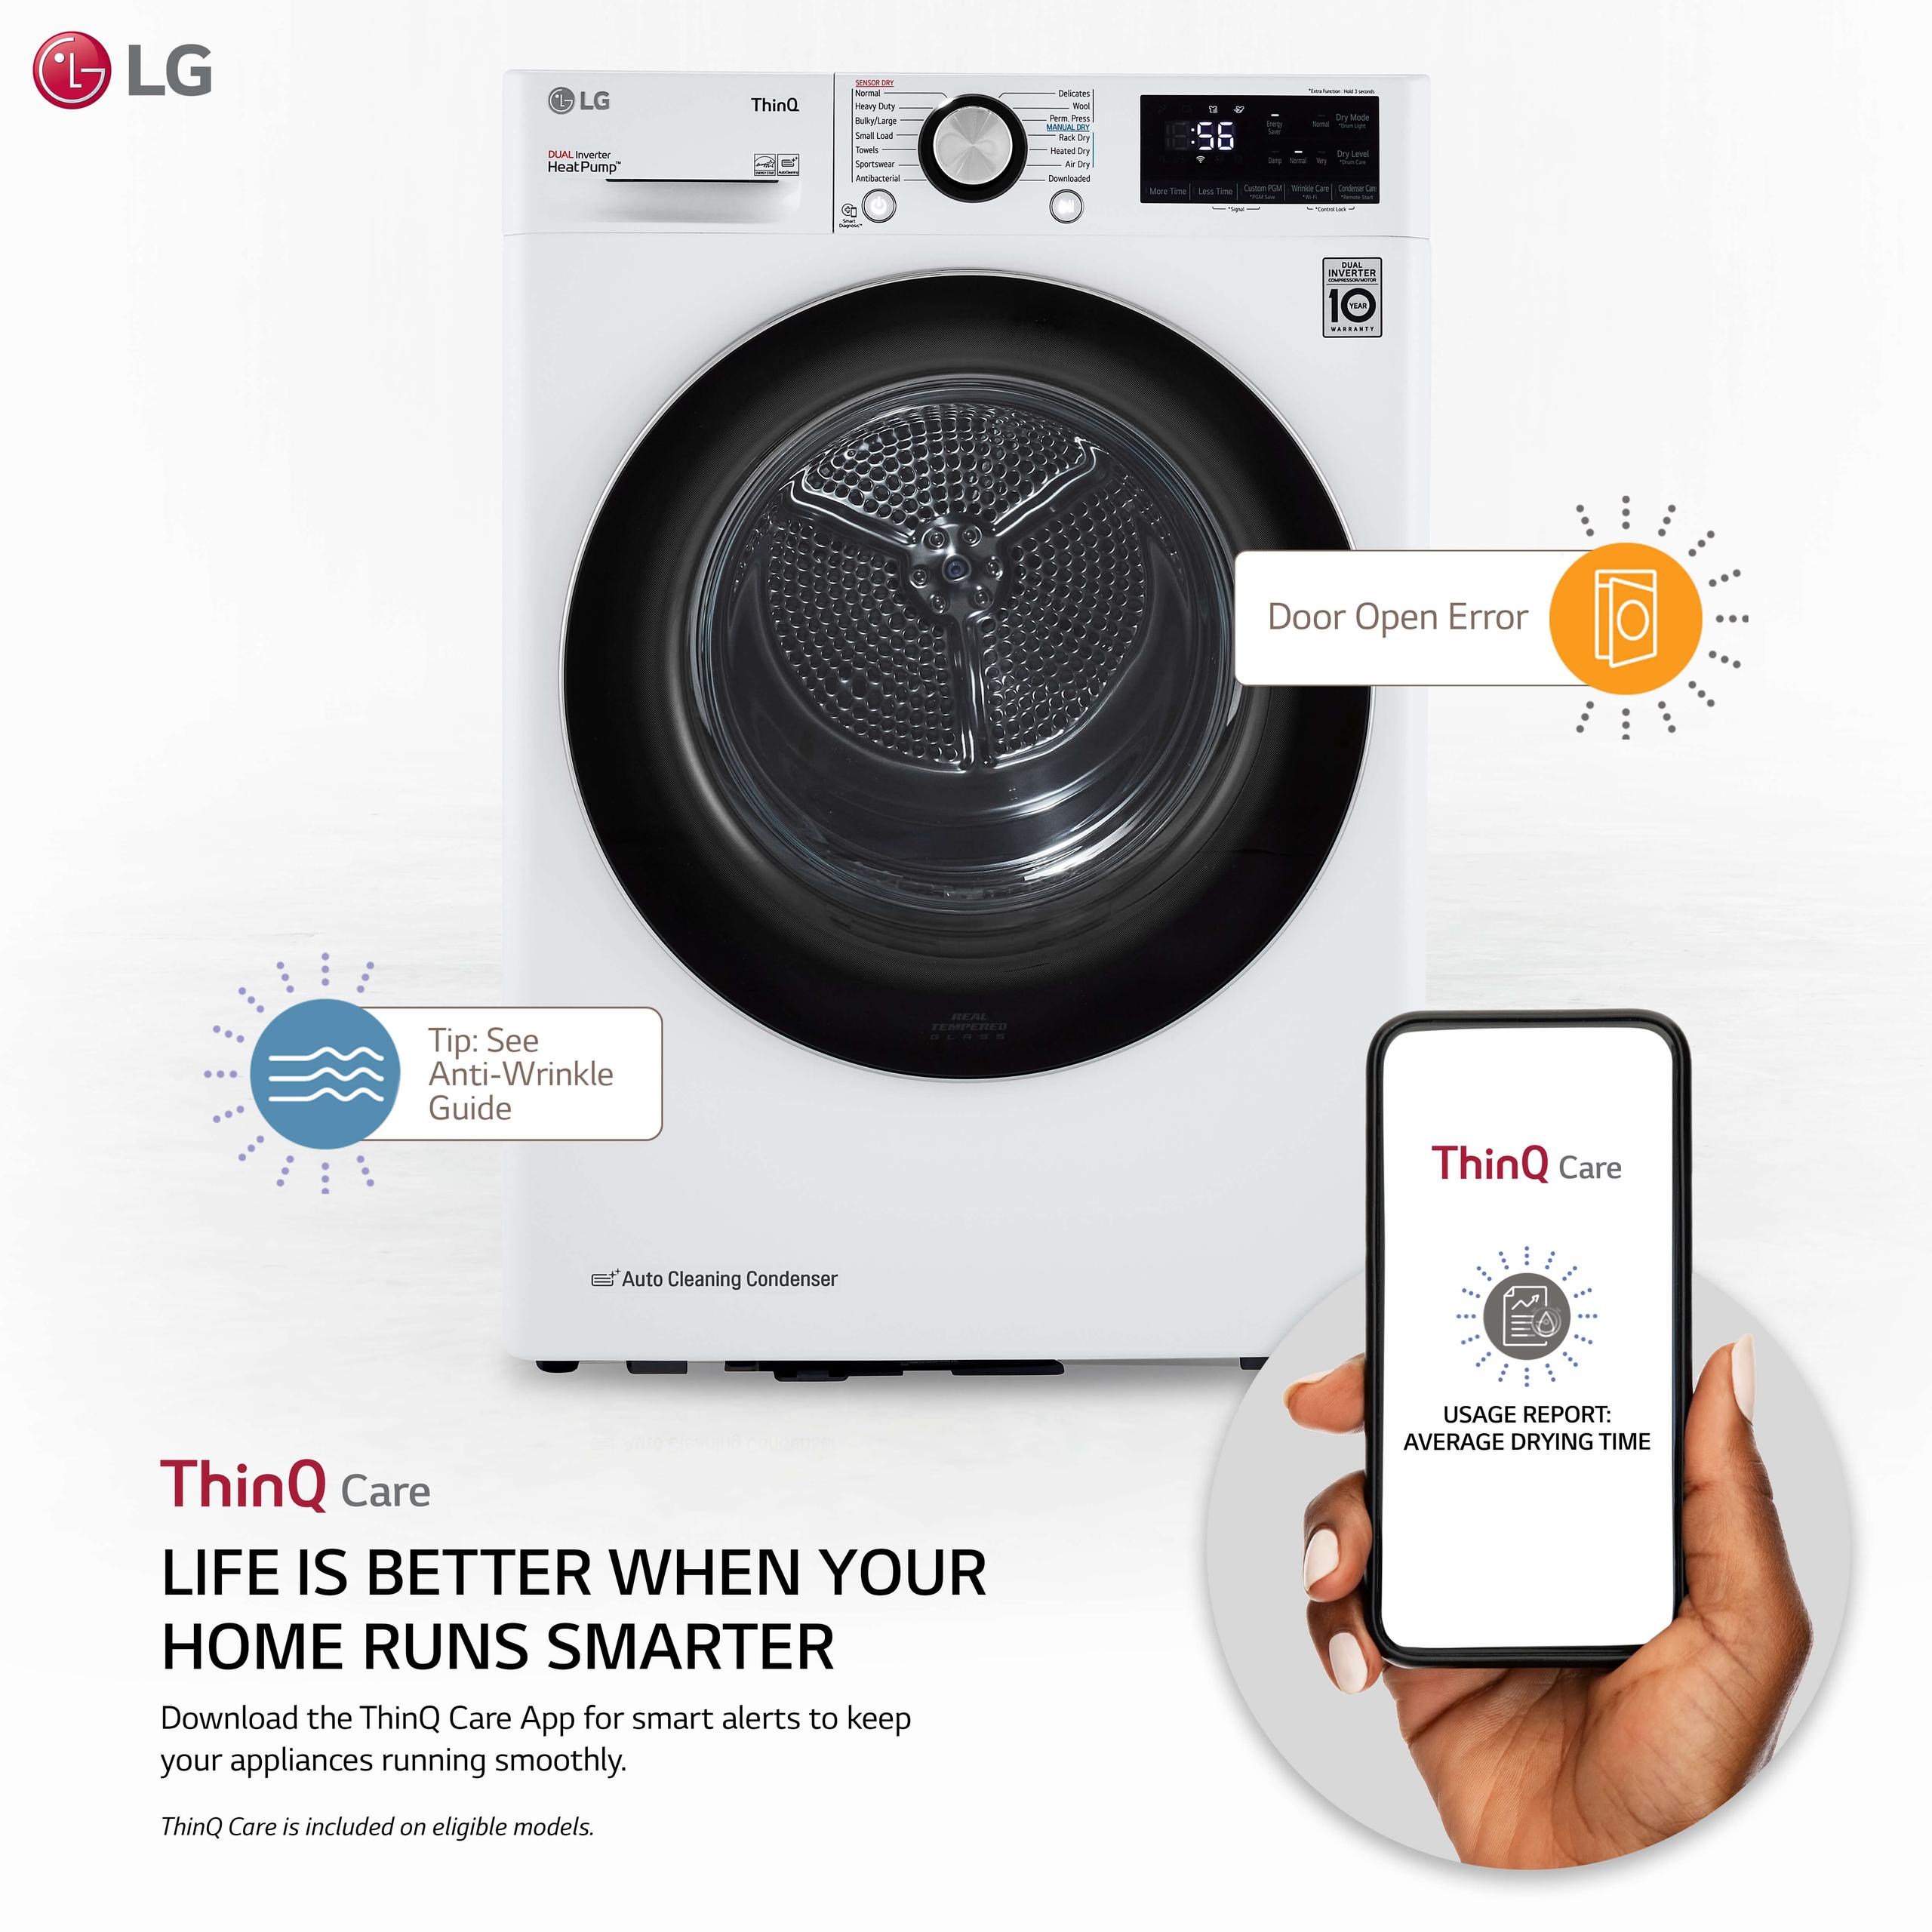 Lg 4.2 cu.ft. Smart wi-fi Enabled Compact Front Load Dryer with Dual Inverter HeatPump™ Technology